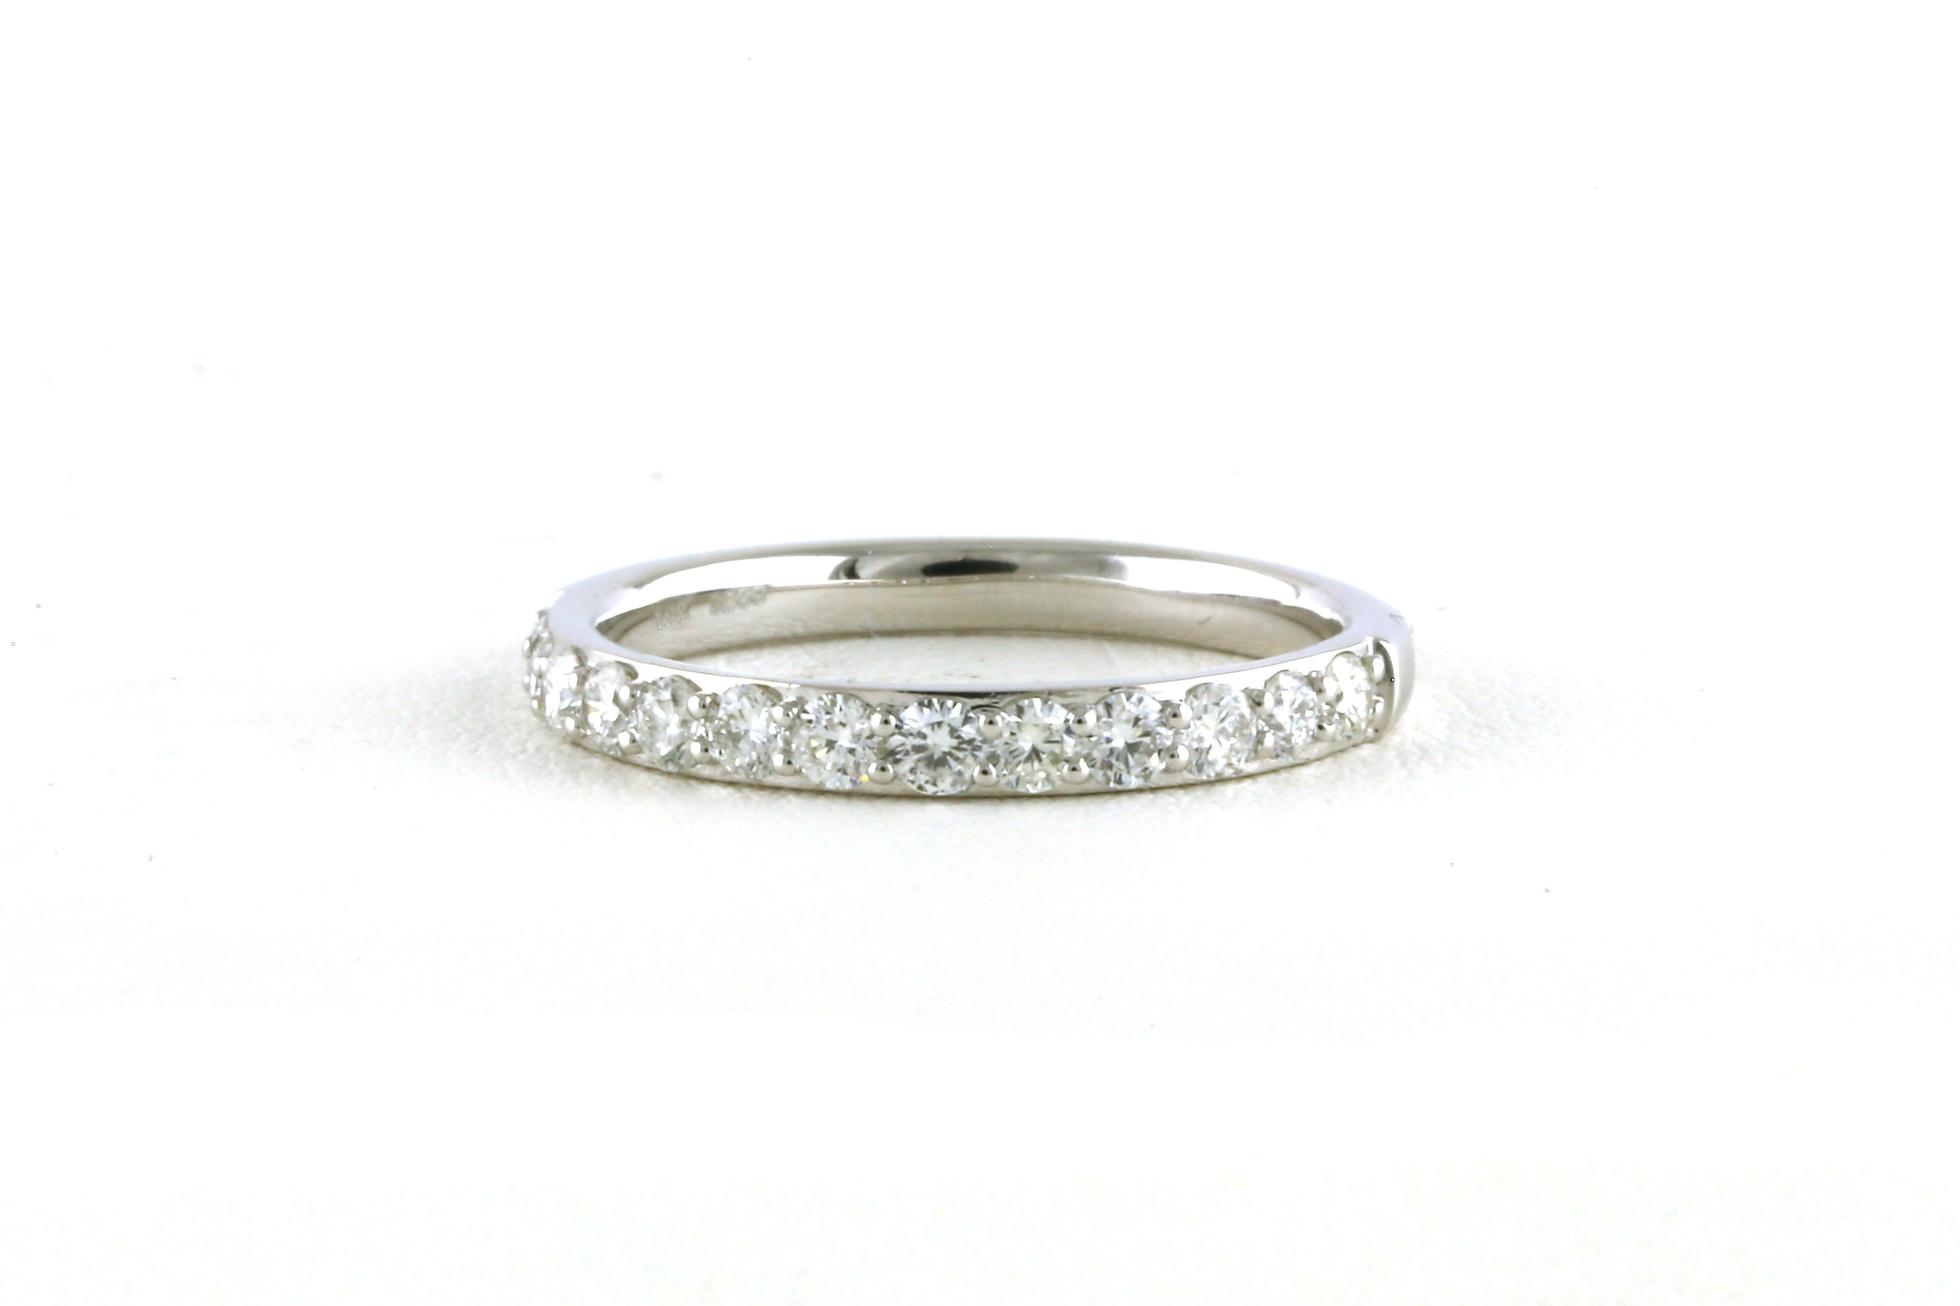 13-Stone Share-prong Diamond Wedding Band in White Gold (0.50cts TWT)